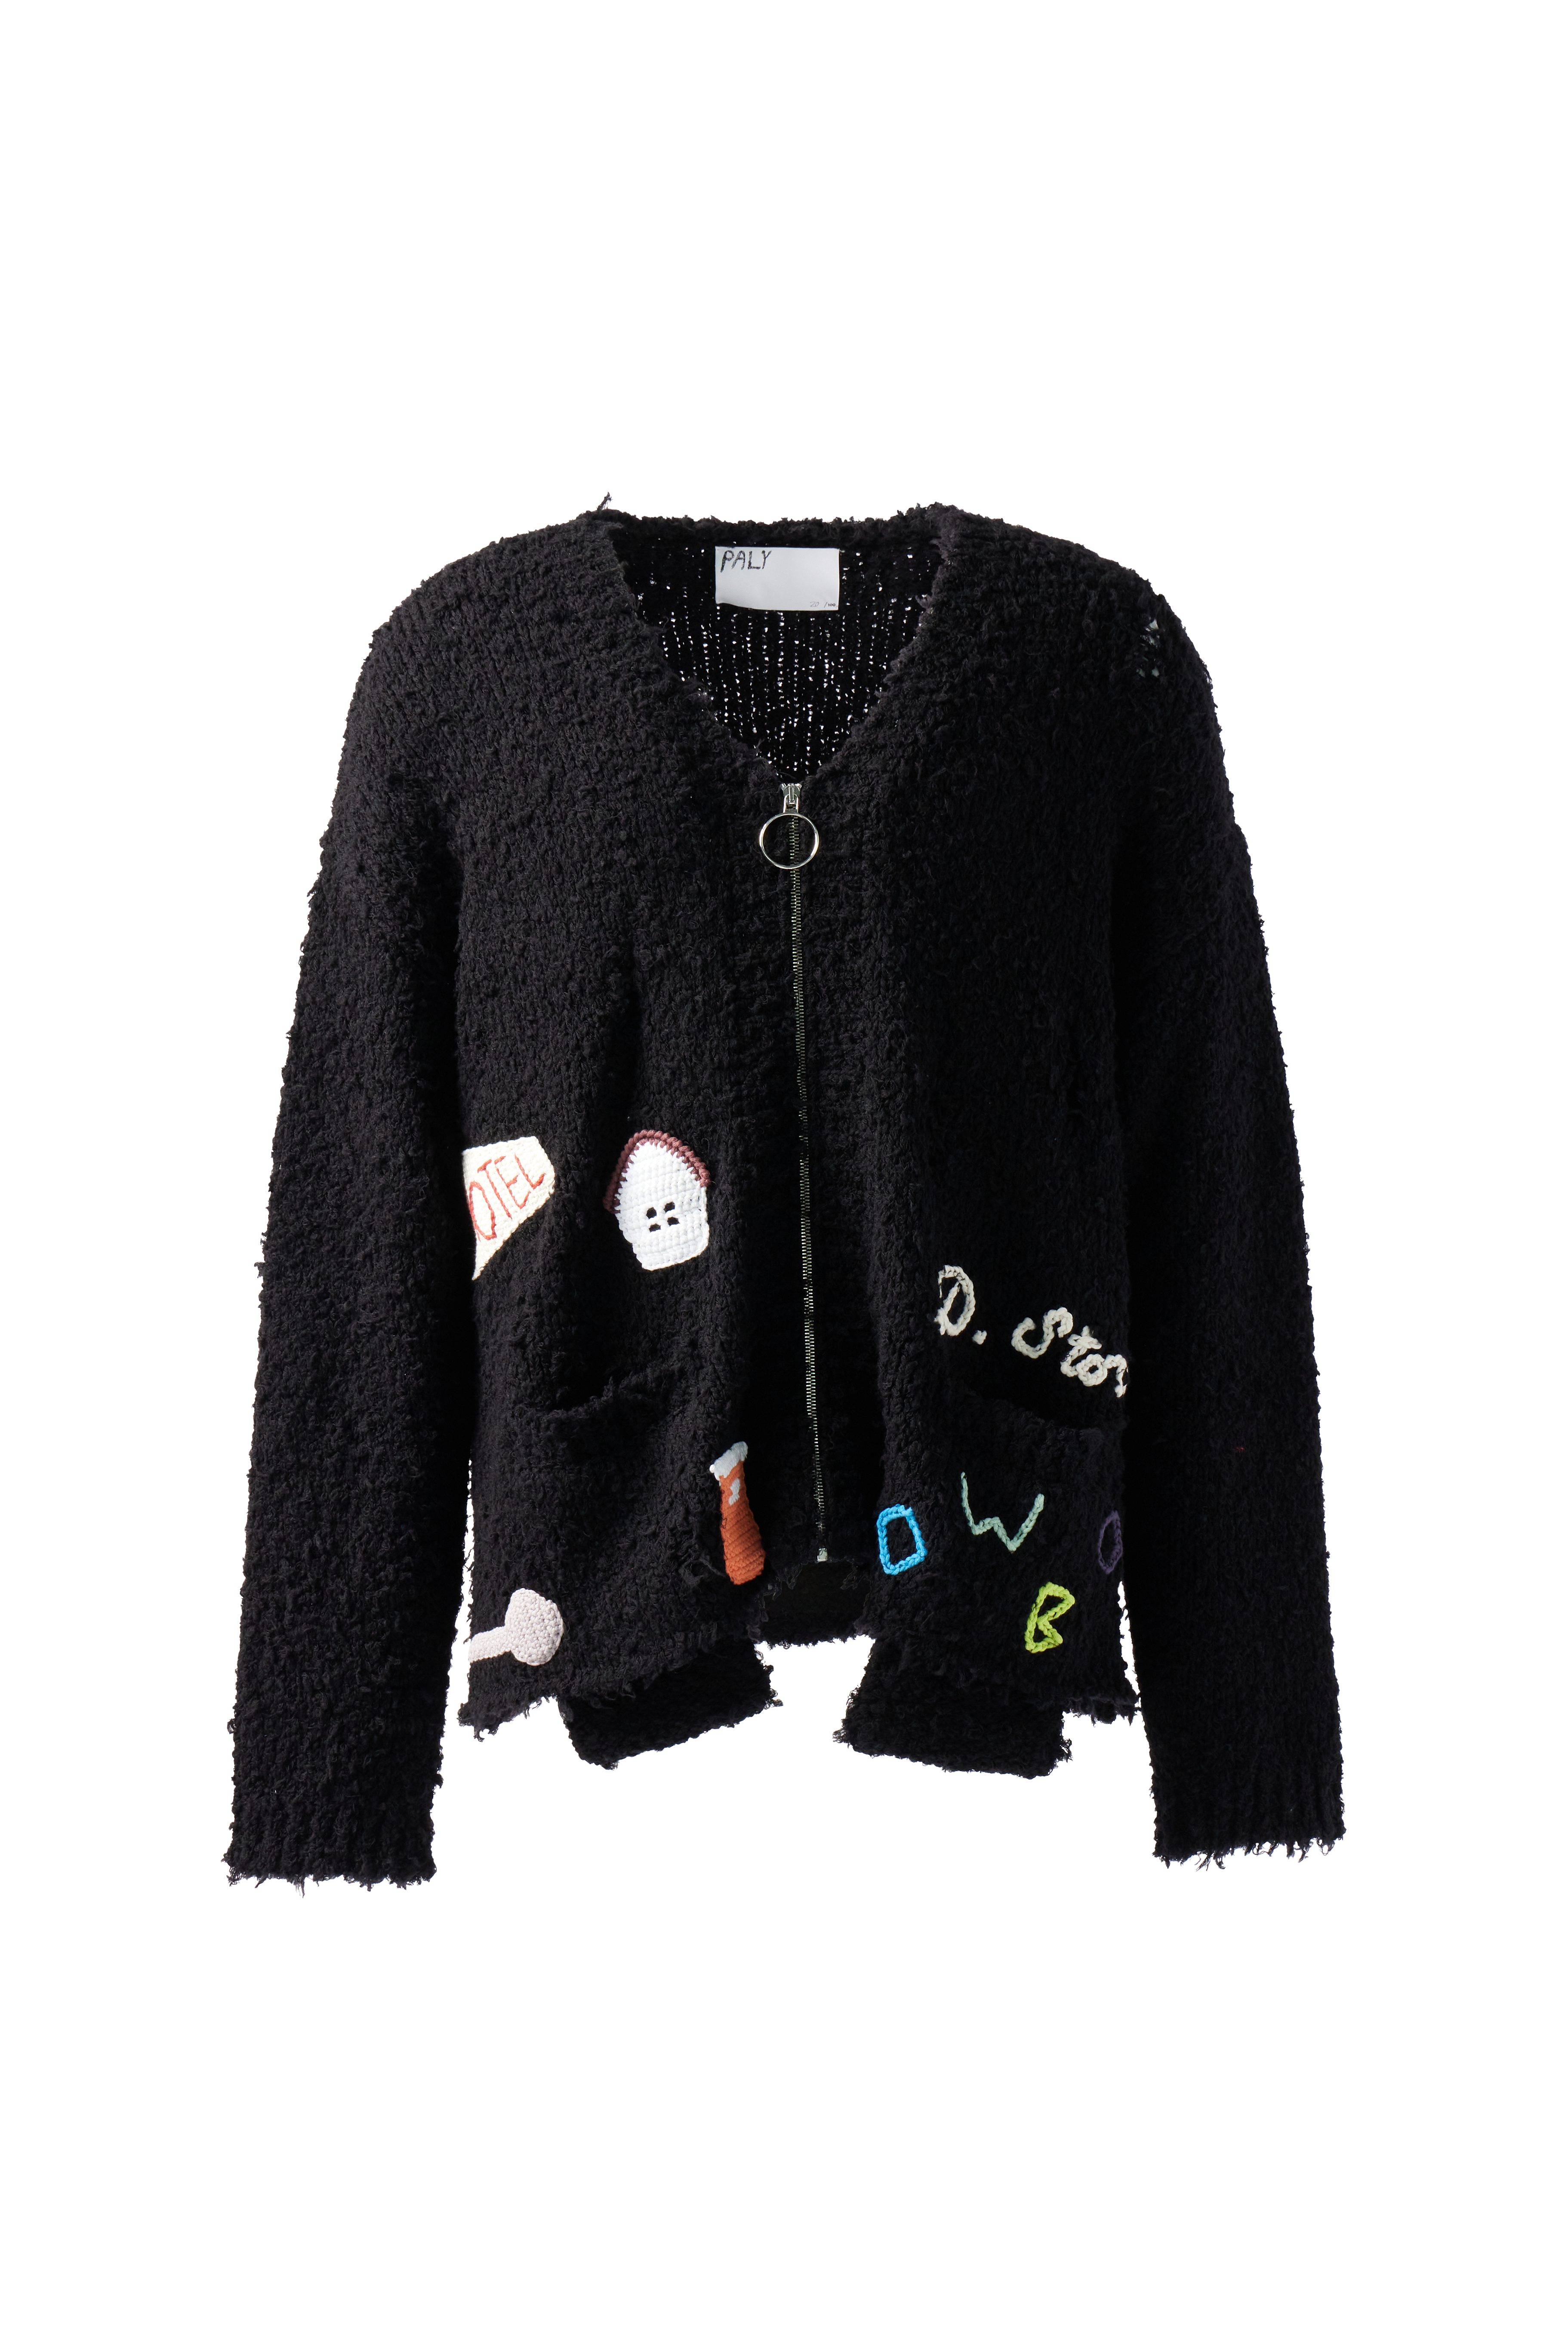 PALY - D. Store Cowboy Cardigan product image